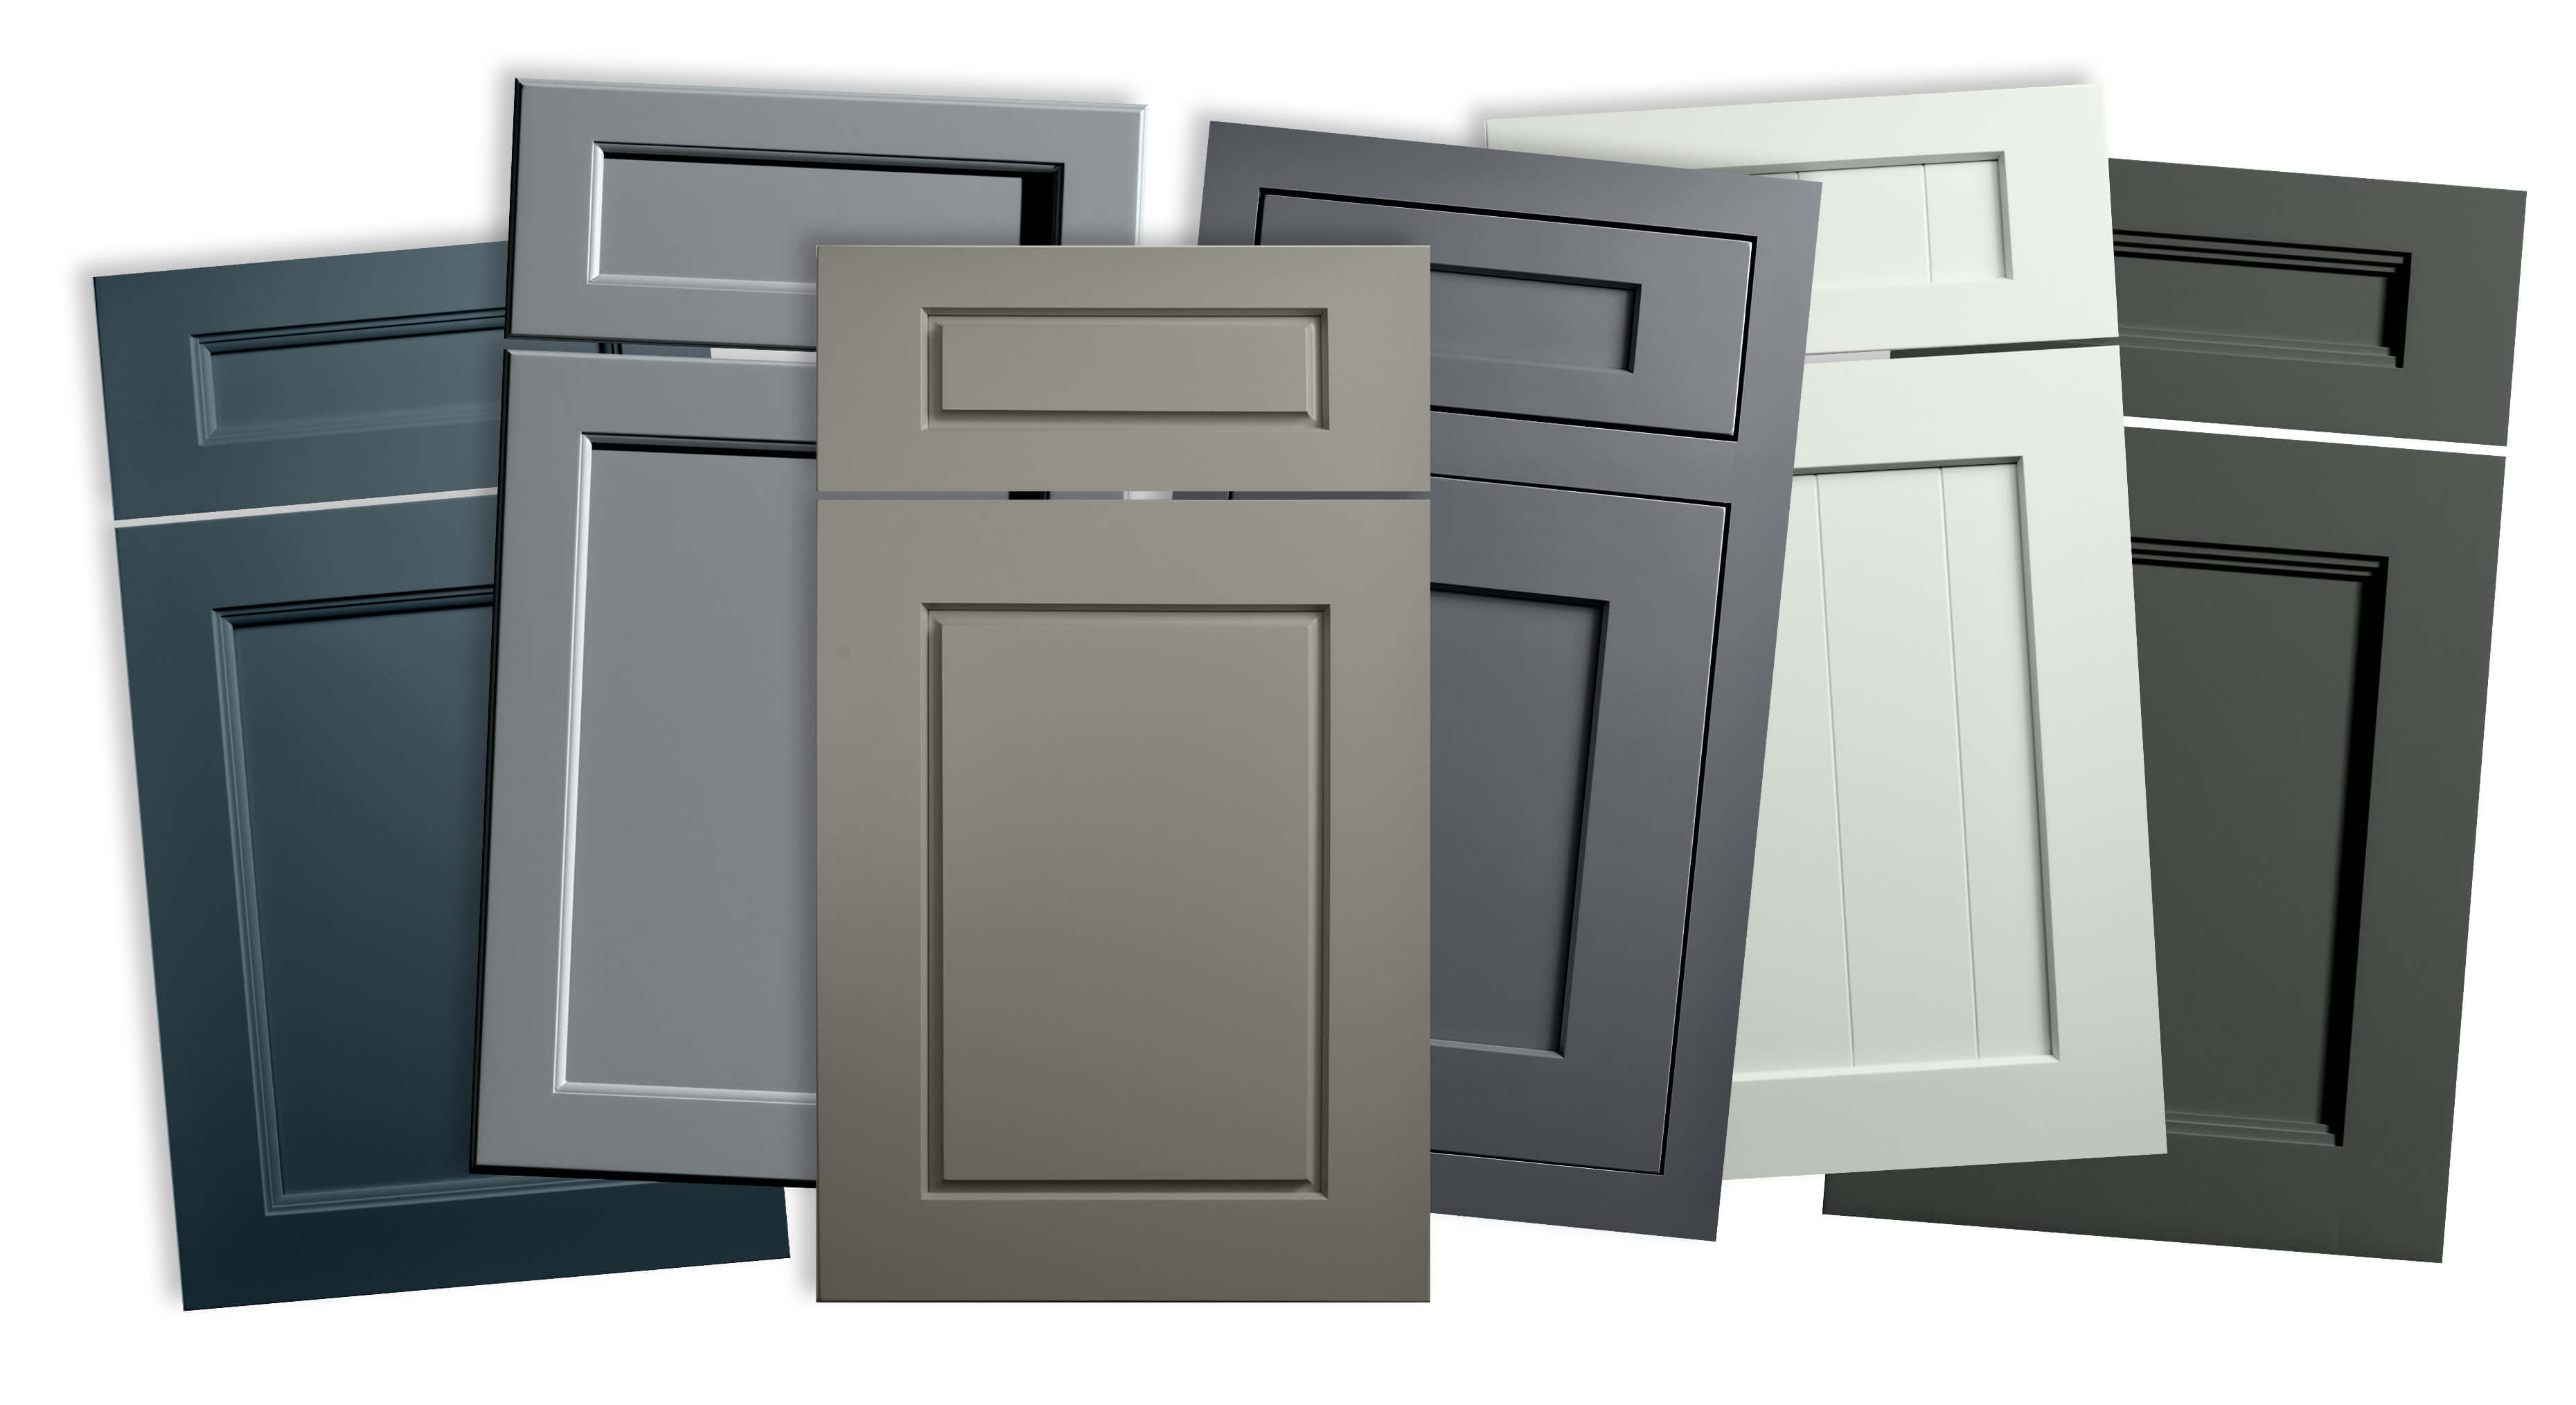 A selection of several different custom paint colors using Dura Supreme Cabinetry's custom paint program called the 